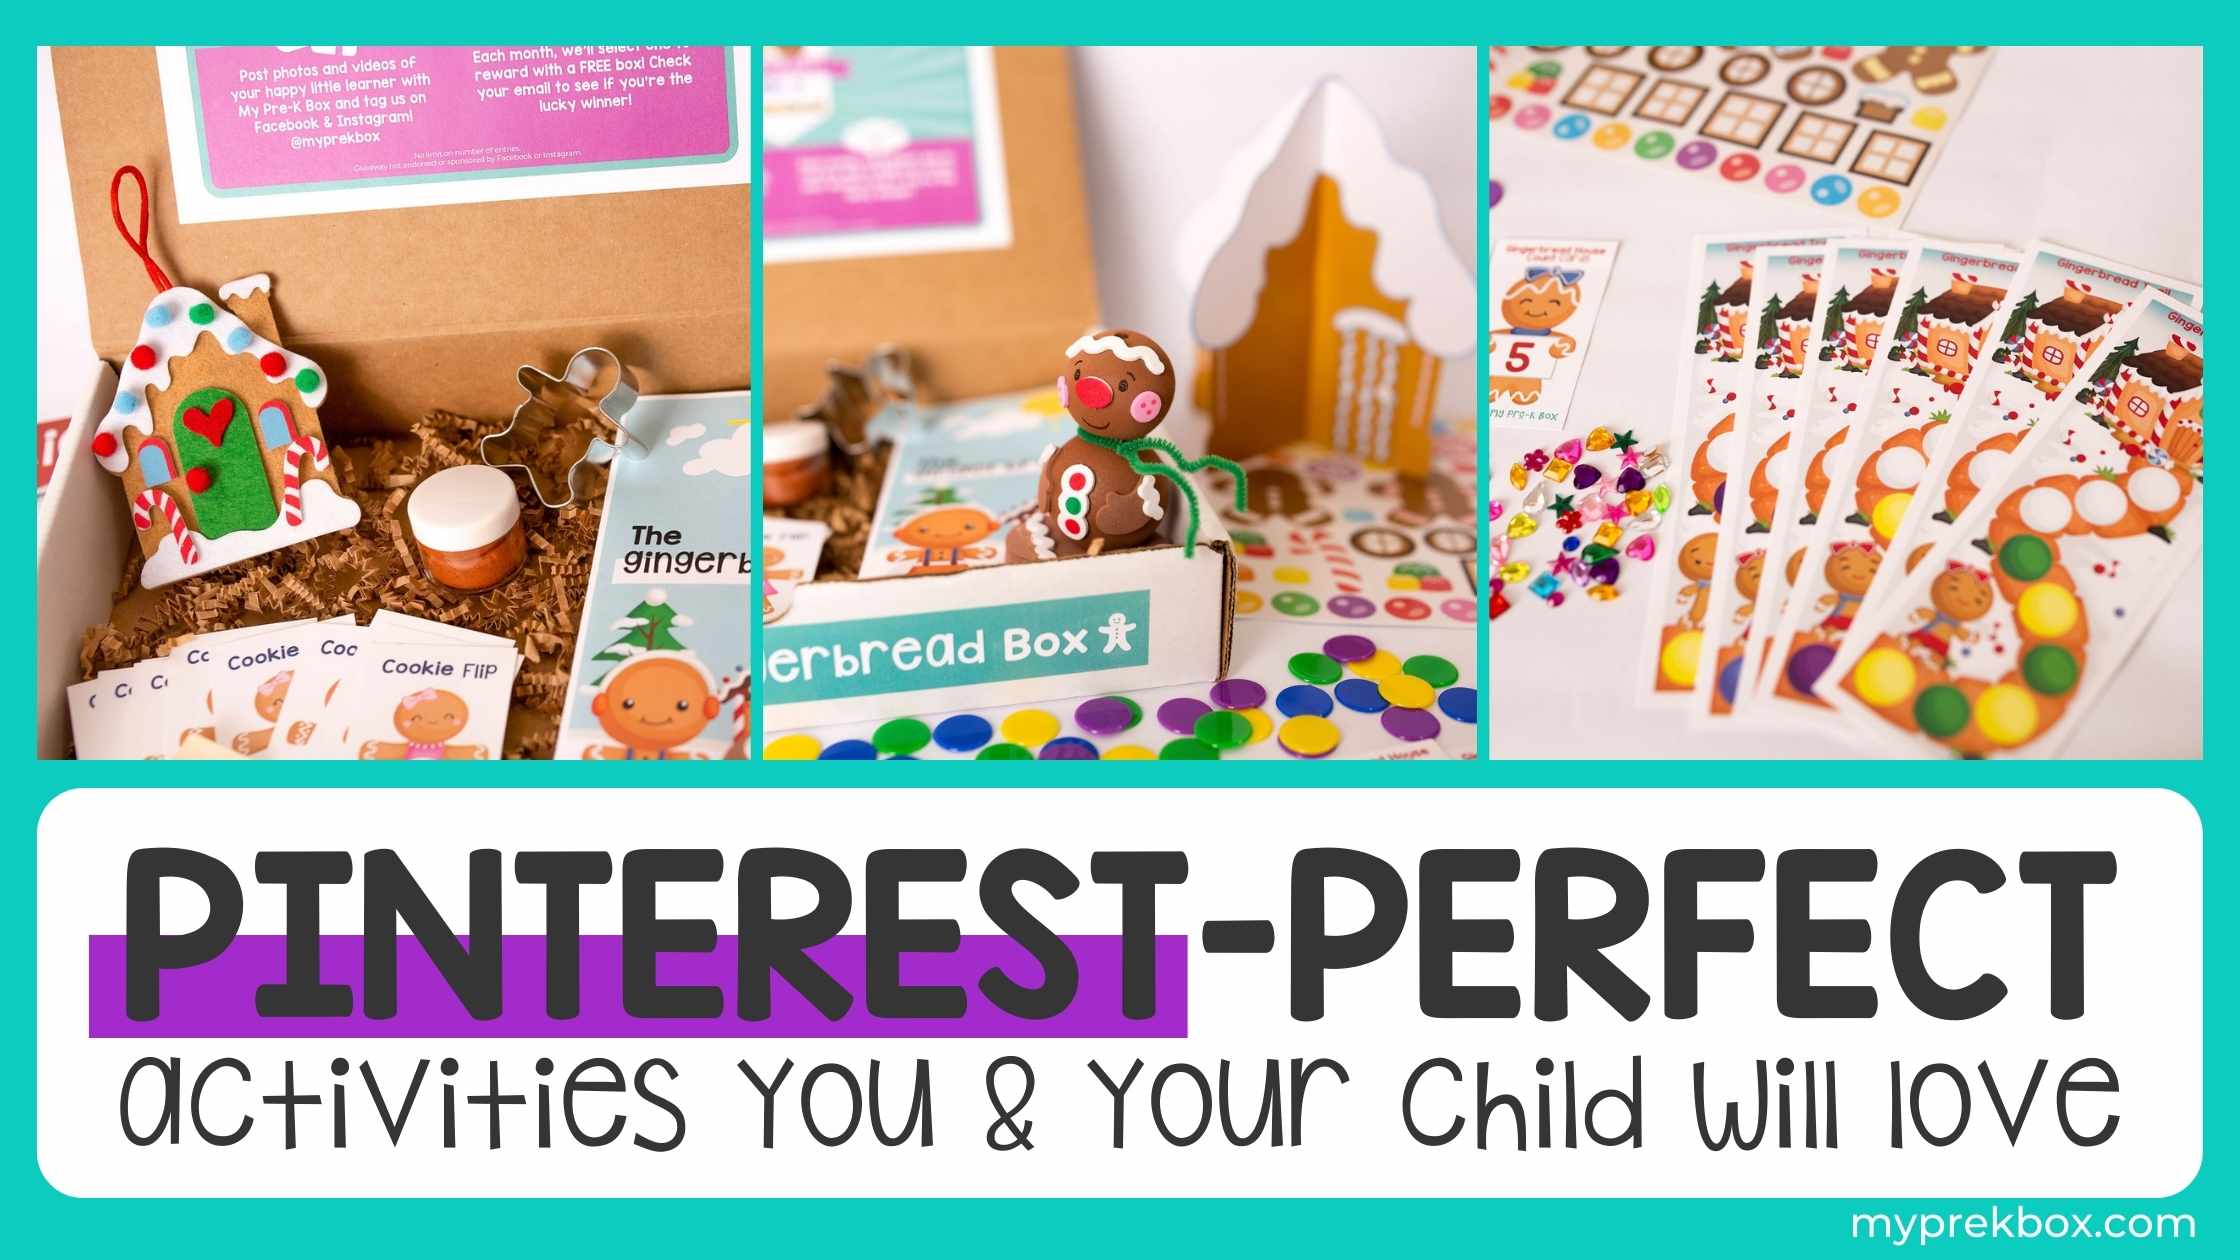 Pinterest-Perfect Activities You & Your Child Will Love